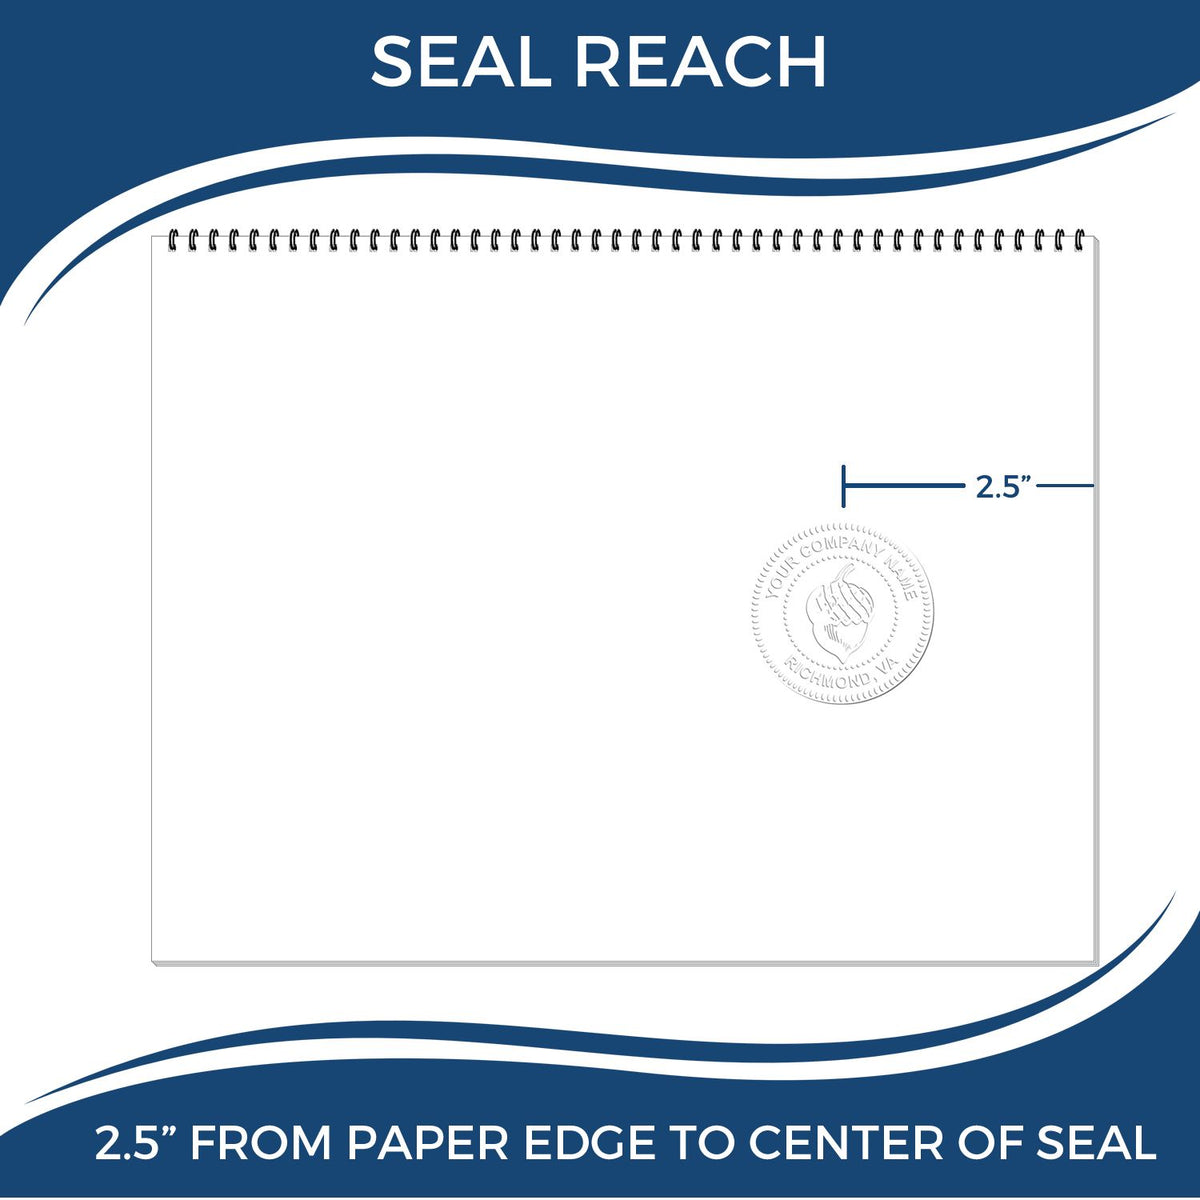 An infographic showing the seal reach which is represented by a ruler and a miniature seal image of the Heavy Duty Cast Iron Florida Engineer Seal Embosser